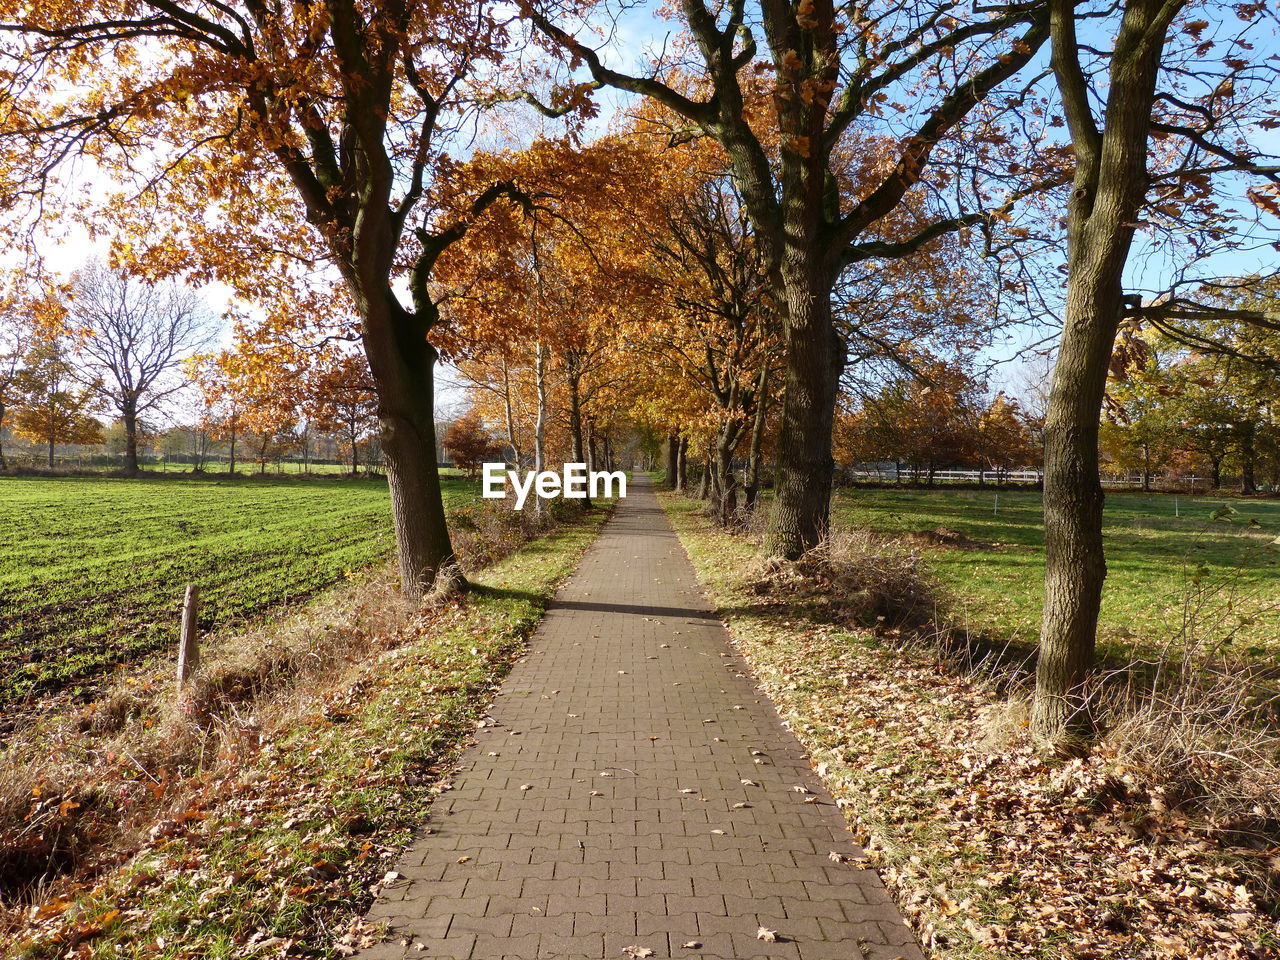 FOOTPATH IN PARK DURING AUTUMN